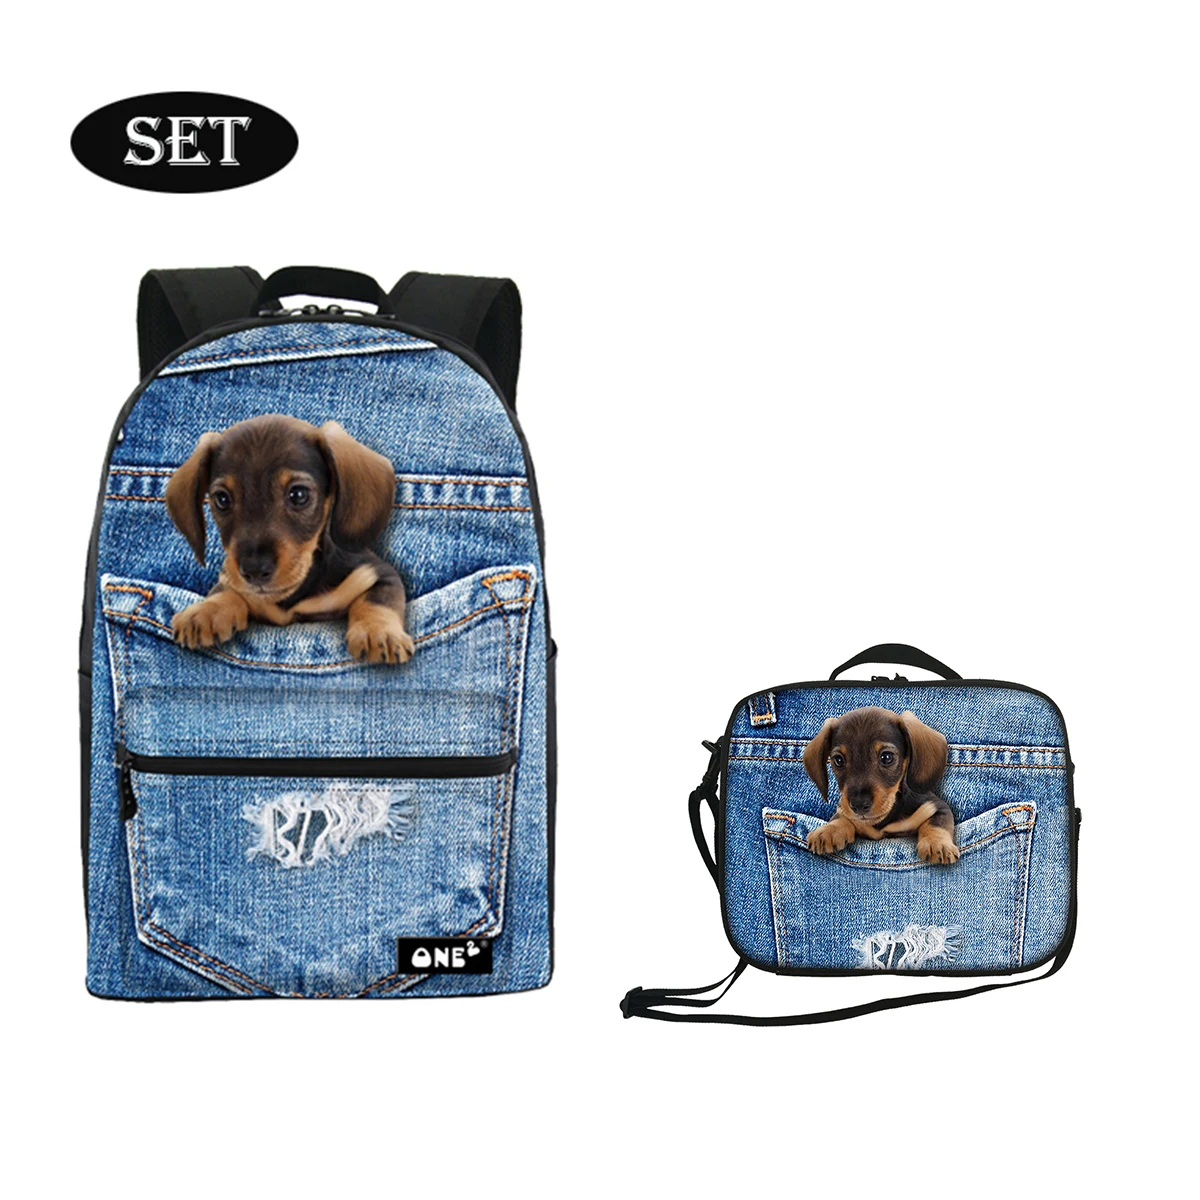 

Hot Sale Cute Cat&Dog On Jeans Pocket Printed school bag with lunch box set waterproof kids lunch bag for school+backpacks, Customized